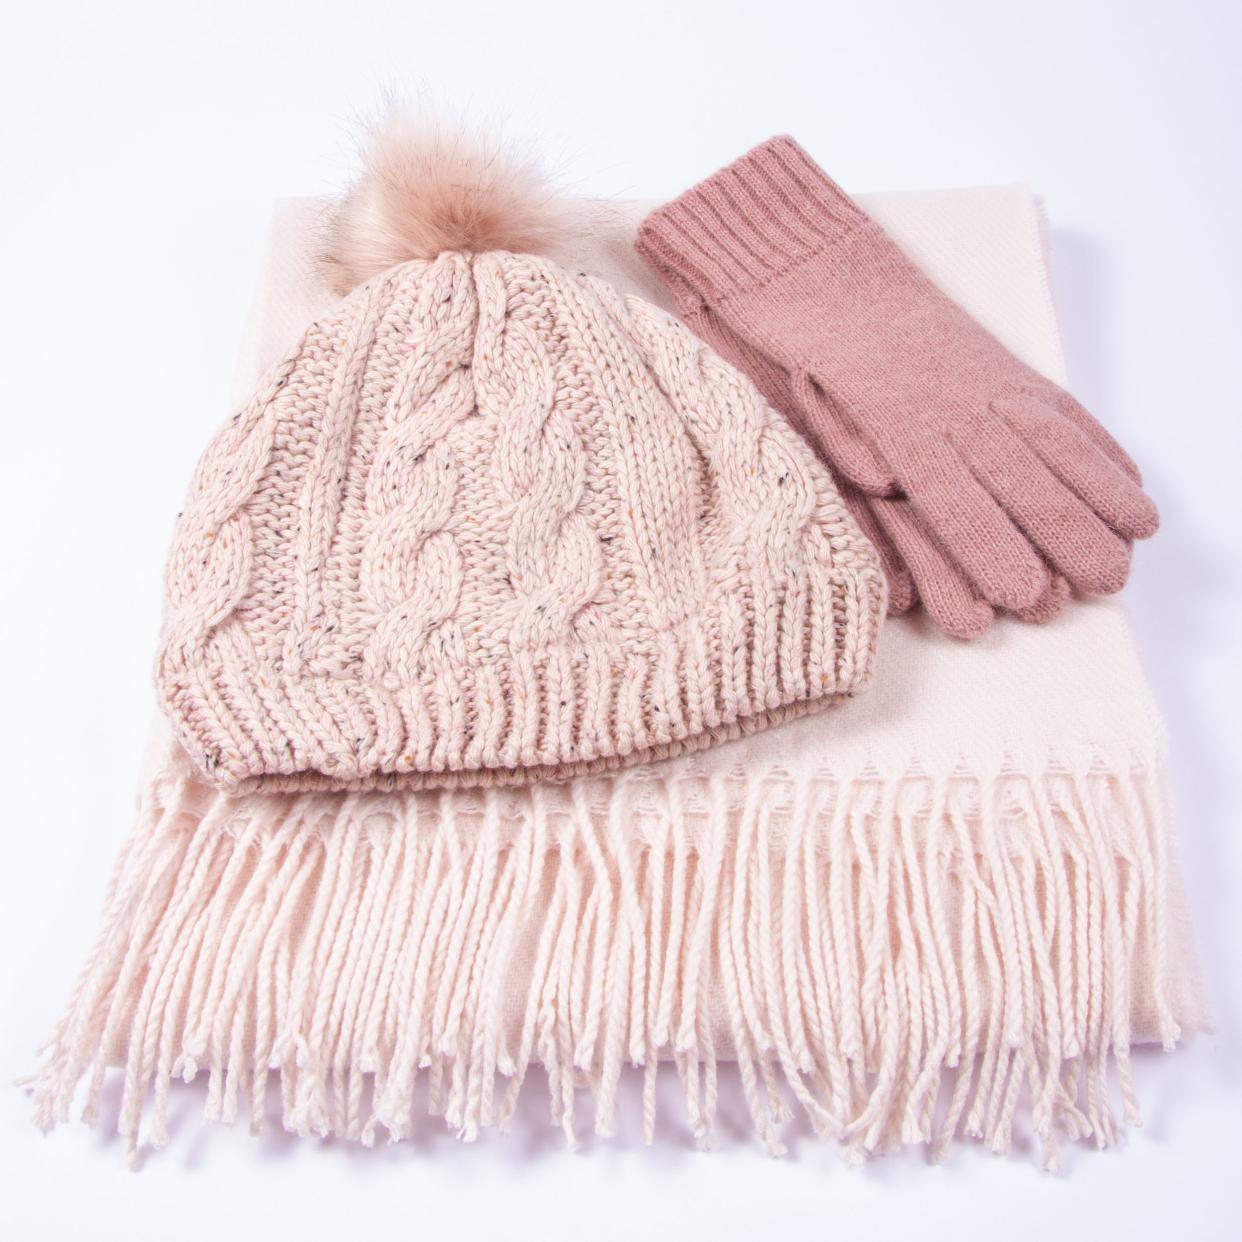 pink hat, scarf and gloves